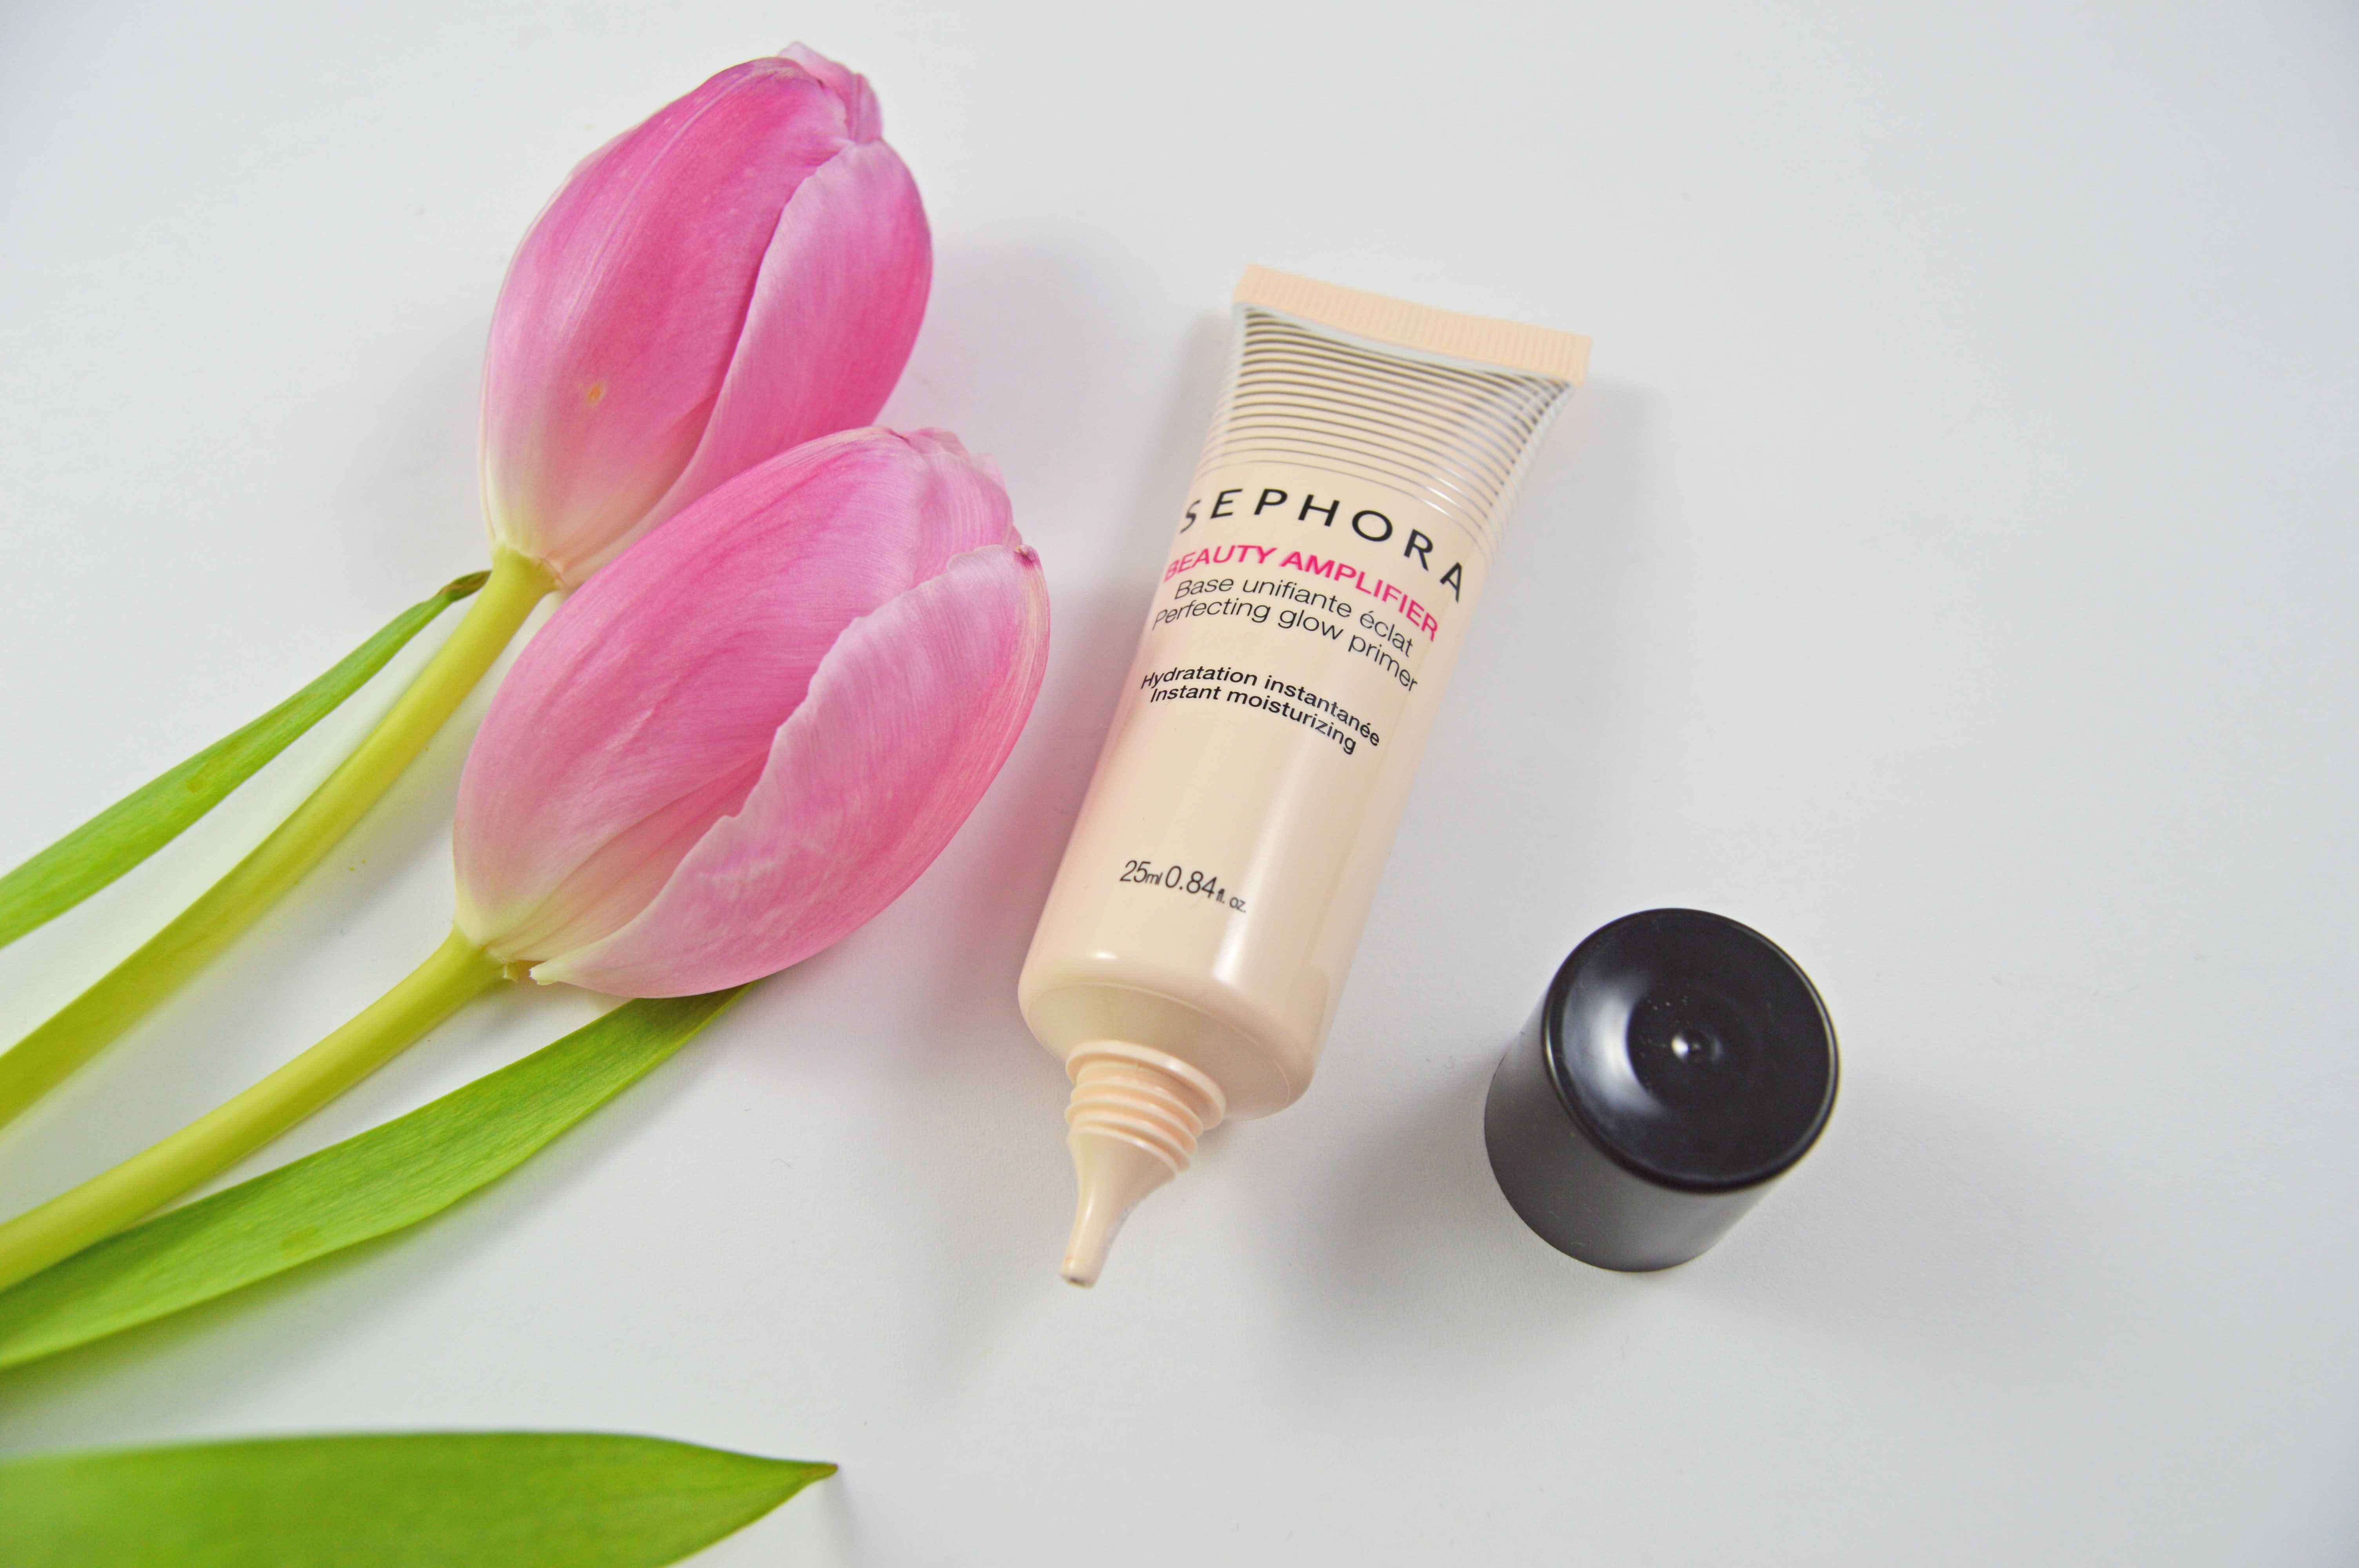 Made in Sephora Beauty Amplifier - Perfecting Glow Primer